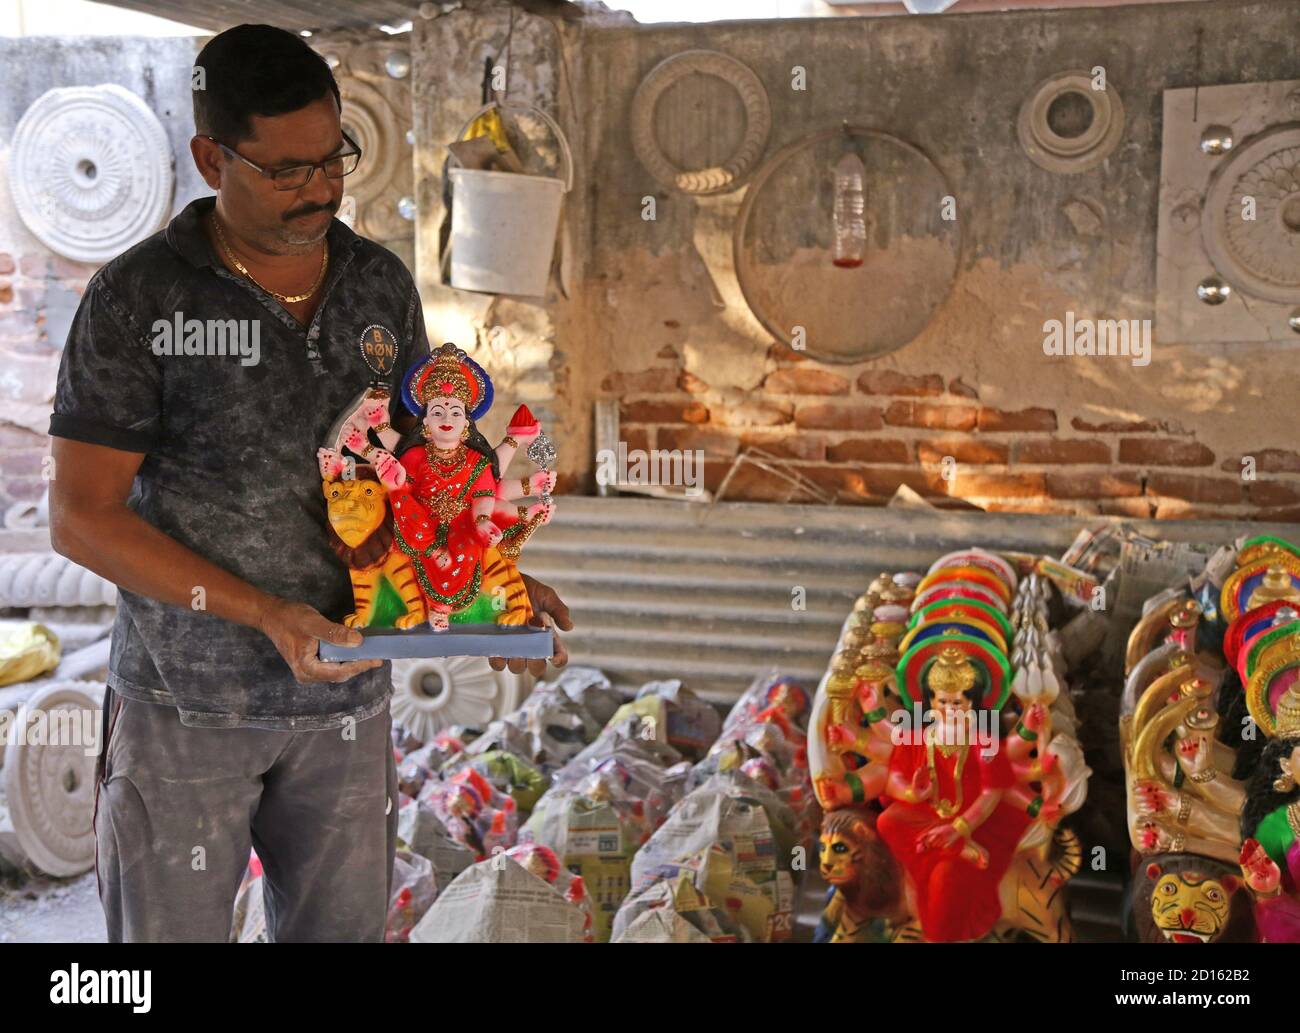 Beawar, Rajasthan, India, Oct. 5, 2020: Idols of Goddess Durga for the upcoming Durga Puja festival, in Beawar. The nine-day Durga Puja festival, which commemorates the slaying of the demon king Mahishasur by the goddess Durga, marks the triumph of good over evil. Hindu festival will begin on Oct. 17. Credit: Sumit Saraswat/Alamy Live News Stock Photo